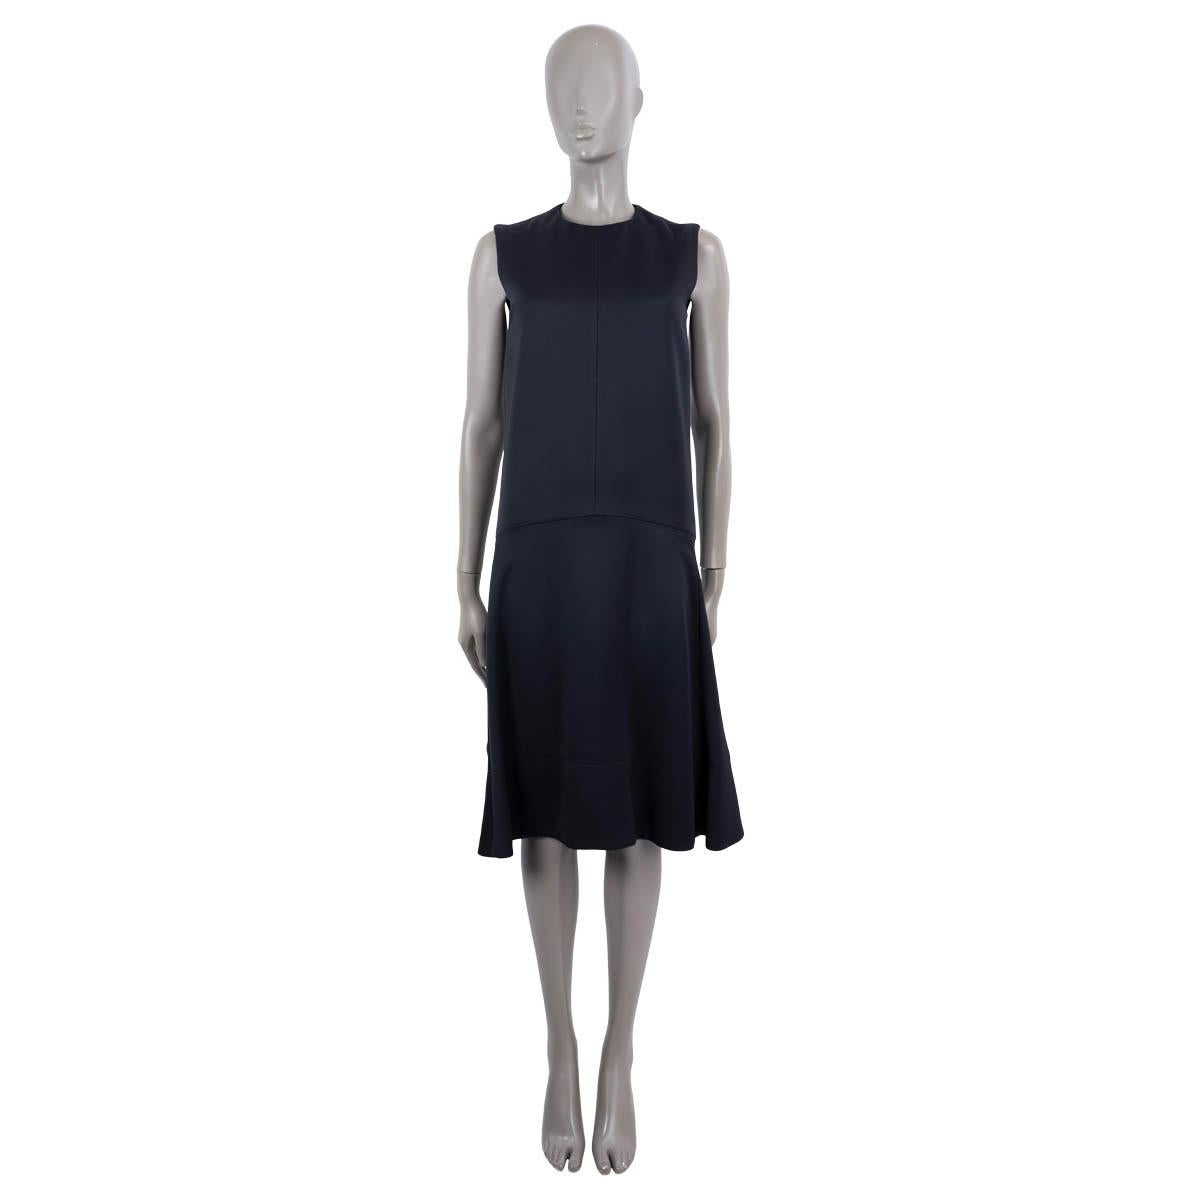 100% authentic Céline sleeveless shift dress in midnight blue viscose (71%) and acetate (29%). The design features a flared bottom part and two slit pockets on the side. Lined in black silk (100%). Has been worn and is in excellent